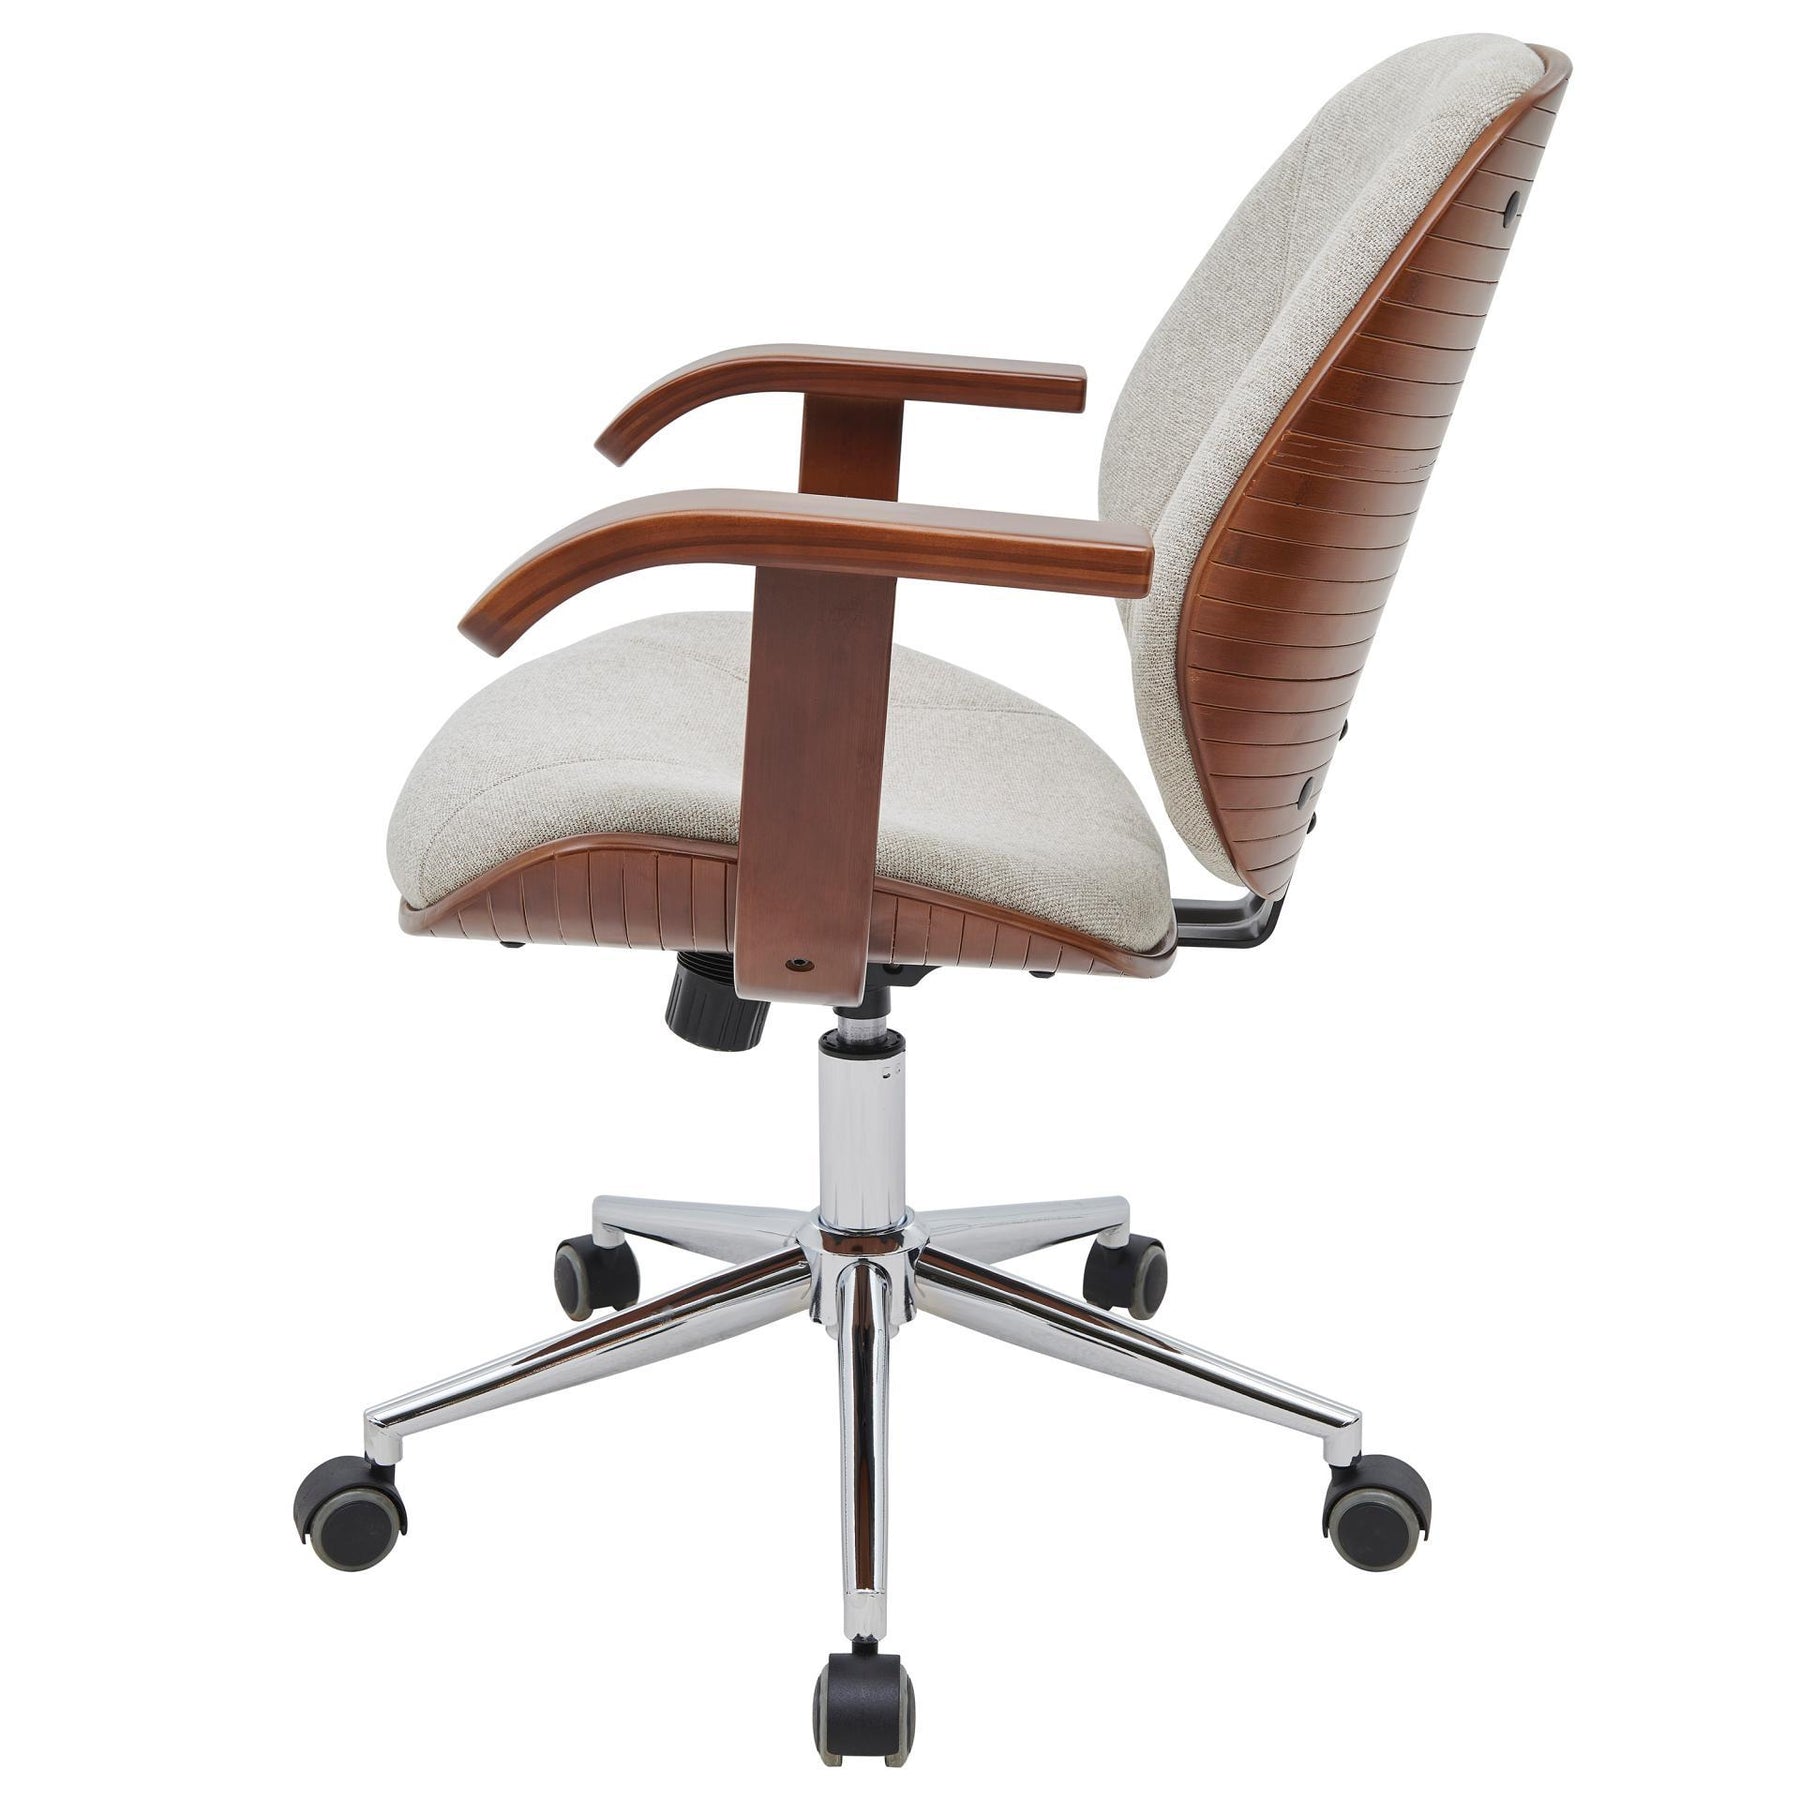 Samuel Fabric Bamboo Office Chair w/ Armrest by New Pacific Direct - 1160031